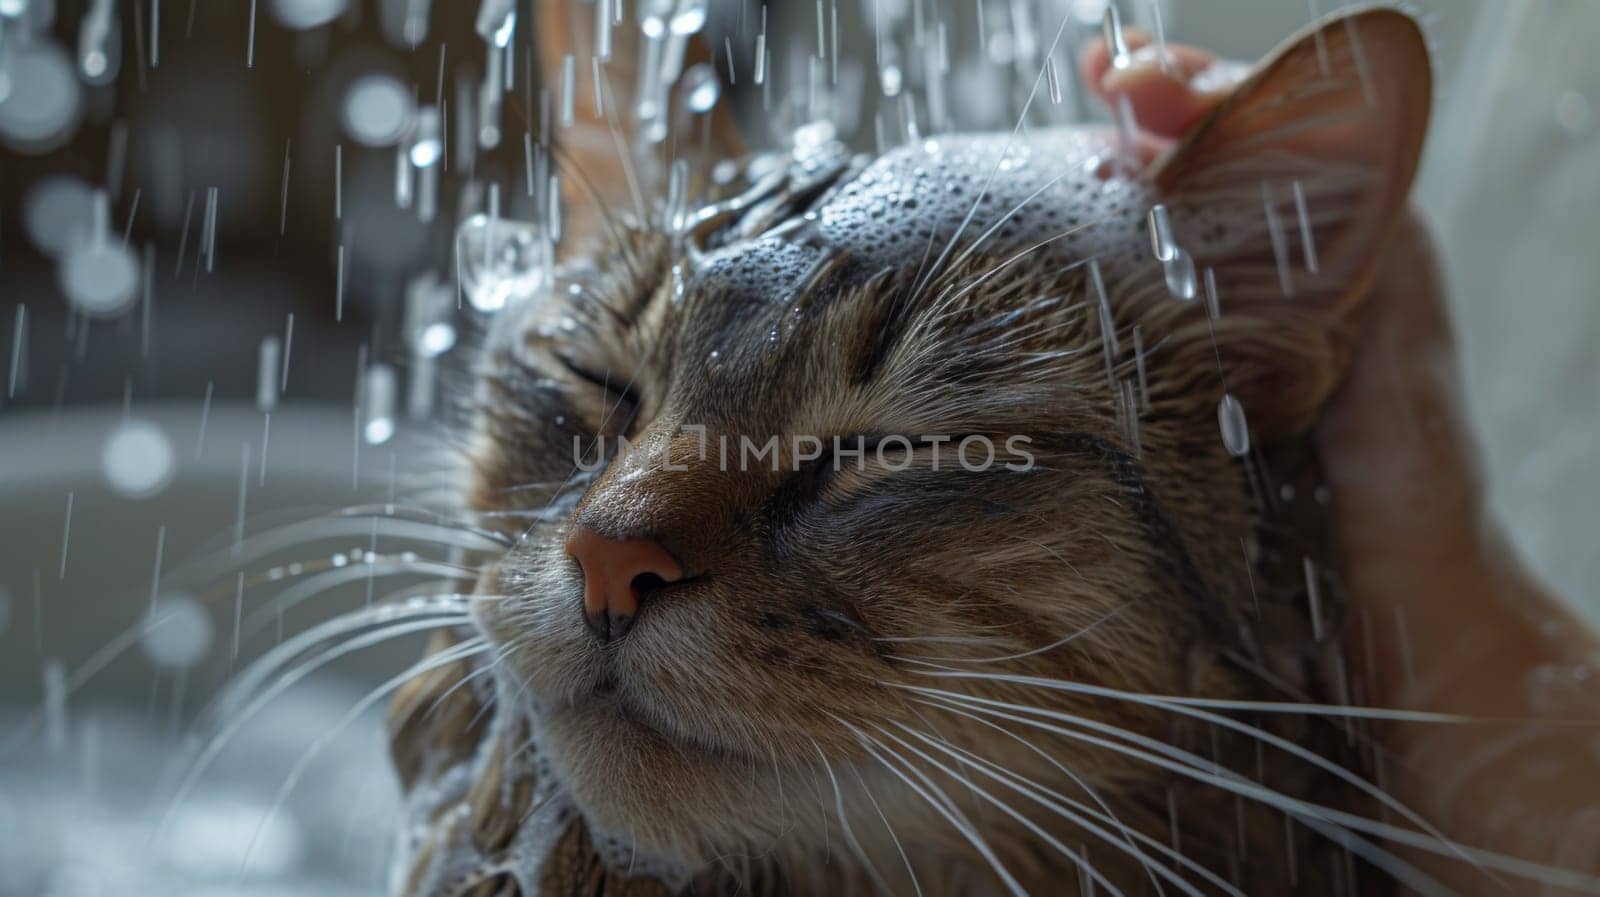 A cat is being washed with a stream of water in the tub, AI by starush